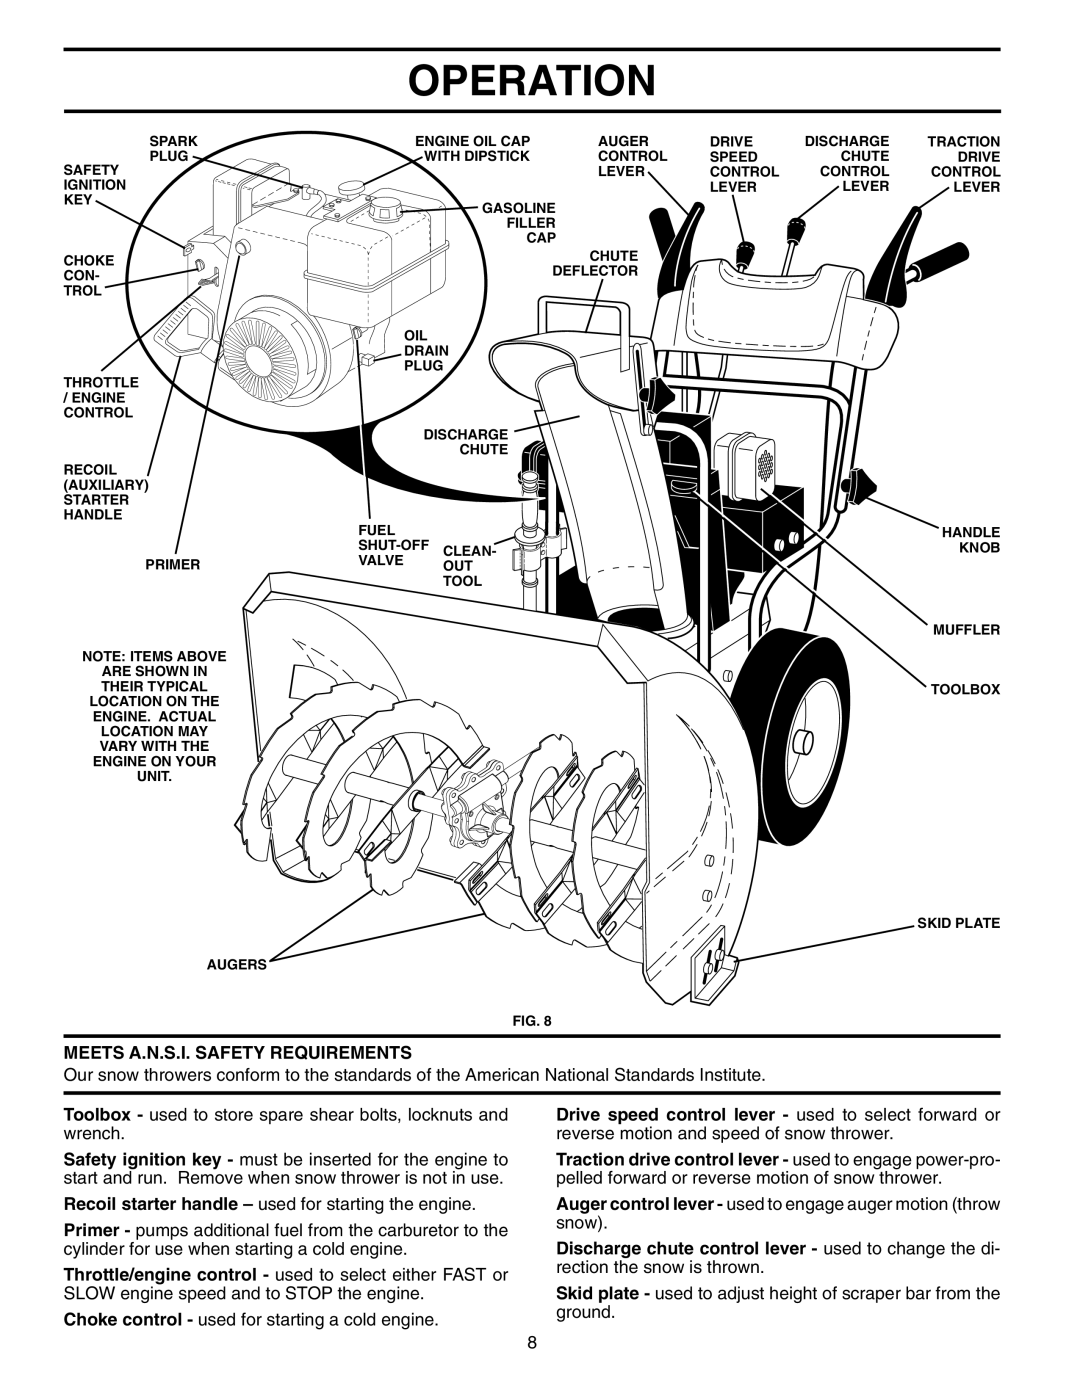 Husqvarna 524S owner manual Operation, Meets A.N.S.I. Safety Requirements 